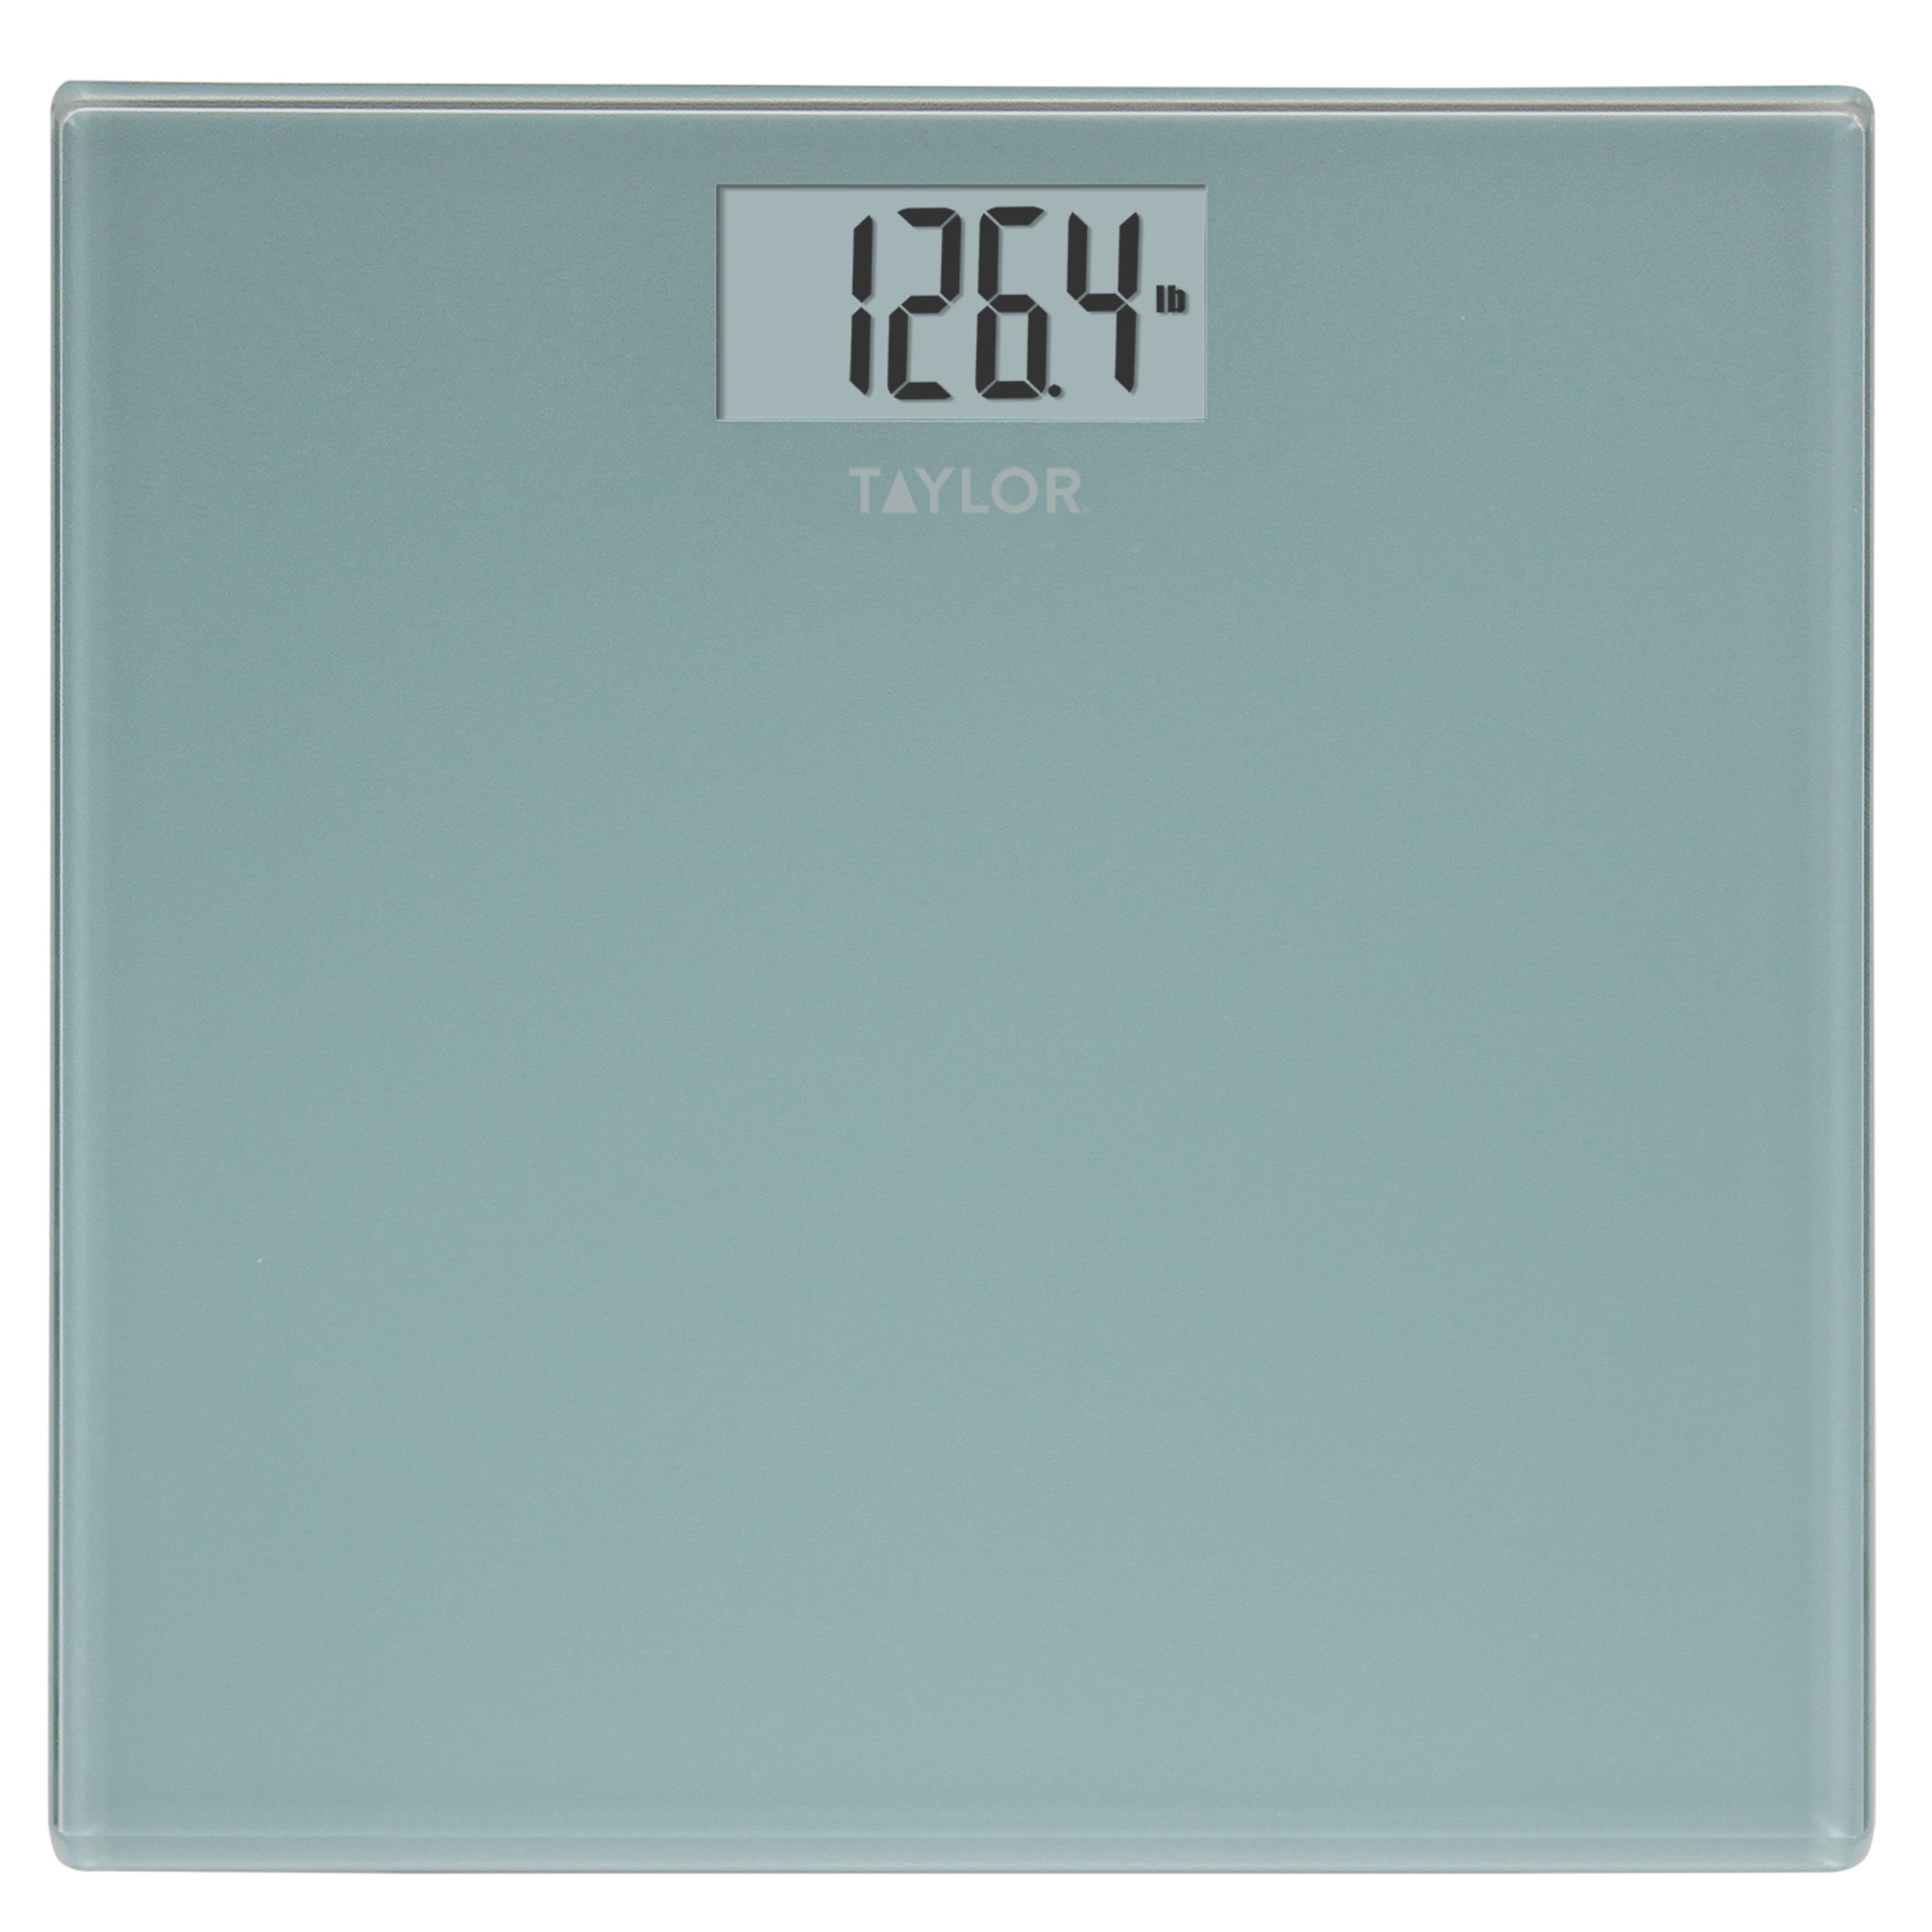 Weight Watchers by Conair Digital Glass and Chrome Scale WW39X